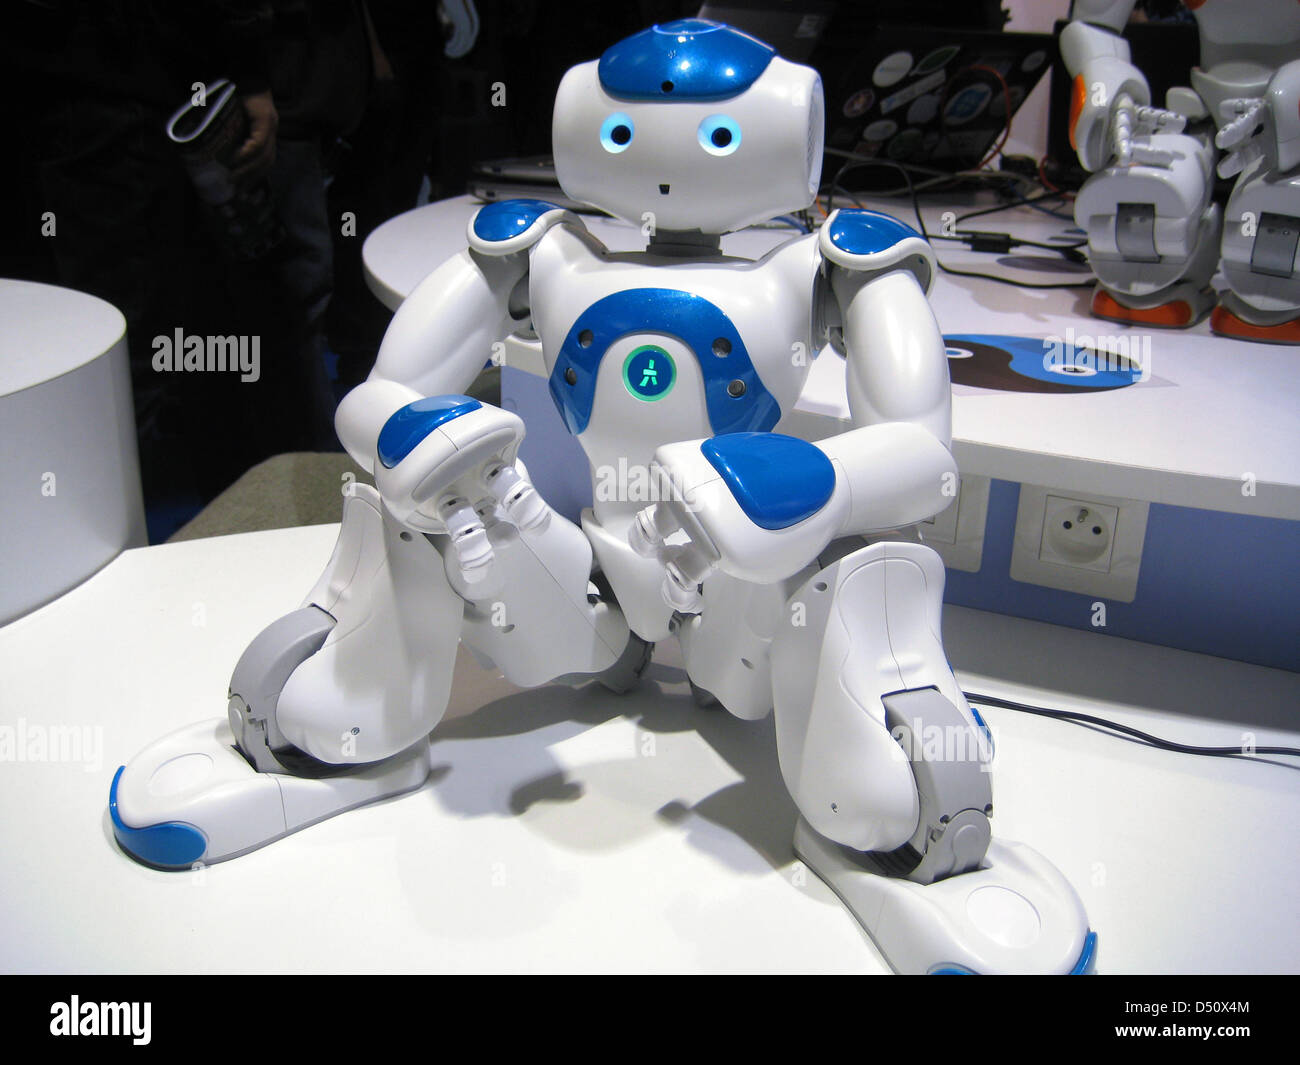 The humanoid robot 'Nao' built by Aldebaran Robotics sits on a table at the Innorobo expo in Lyon, France, 20 March 2013. Researchers and manufacturers are presenting their newest products in the robot industry at Innorobo in Lyon. Photo: Gerd Roth Stock Photo